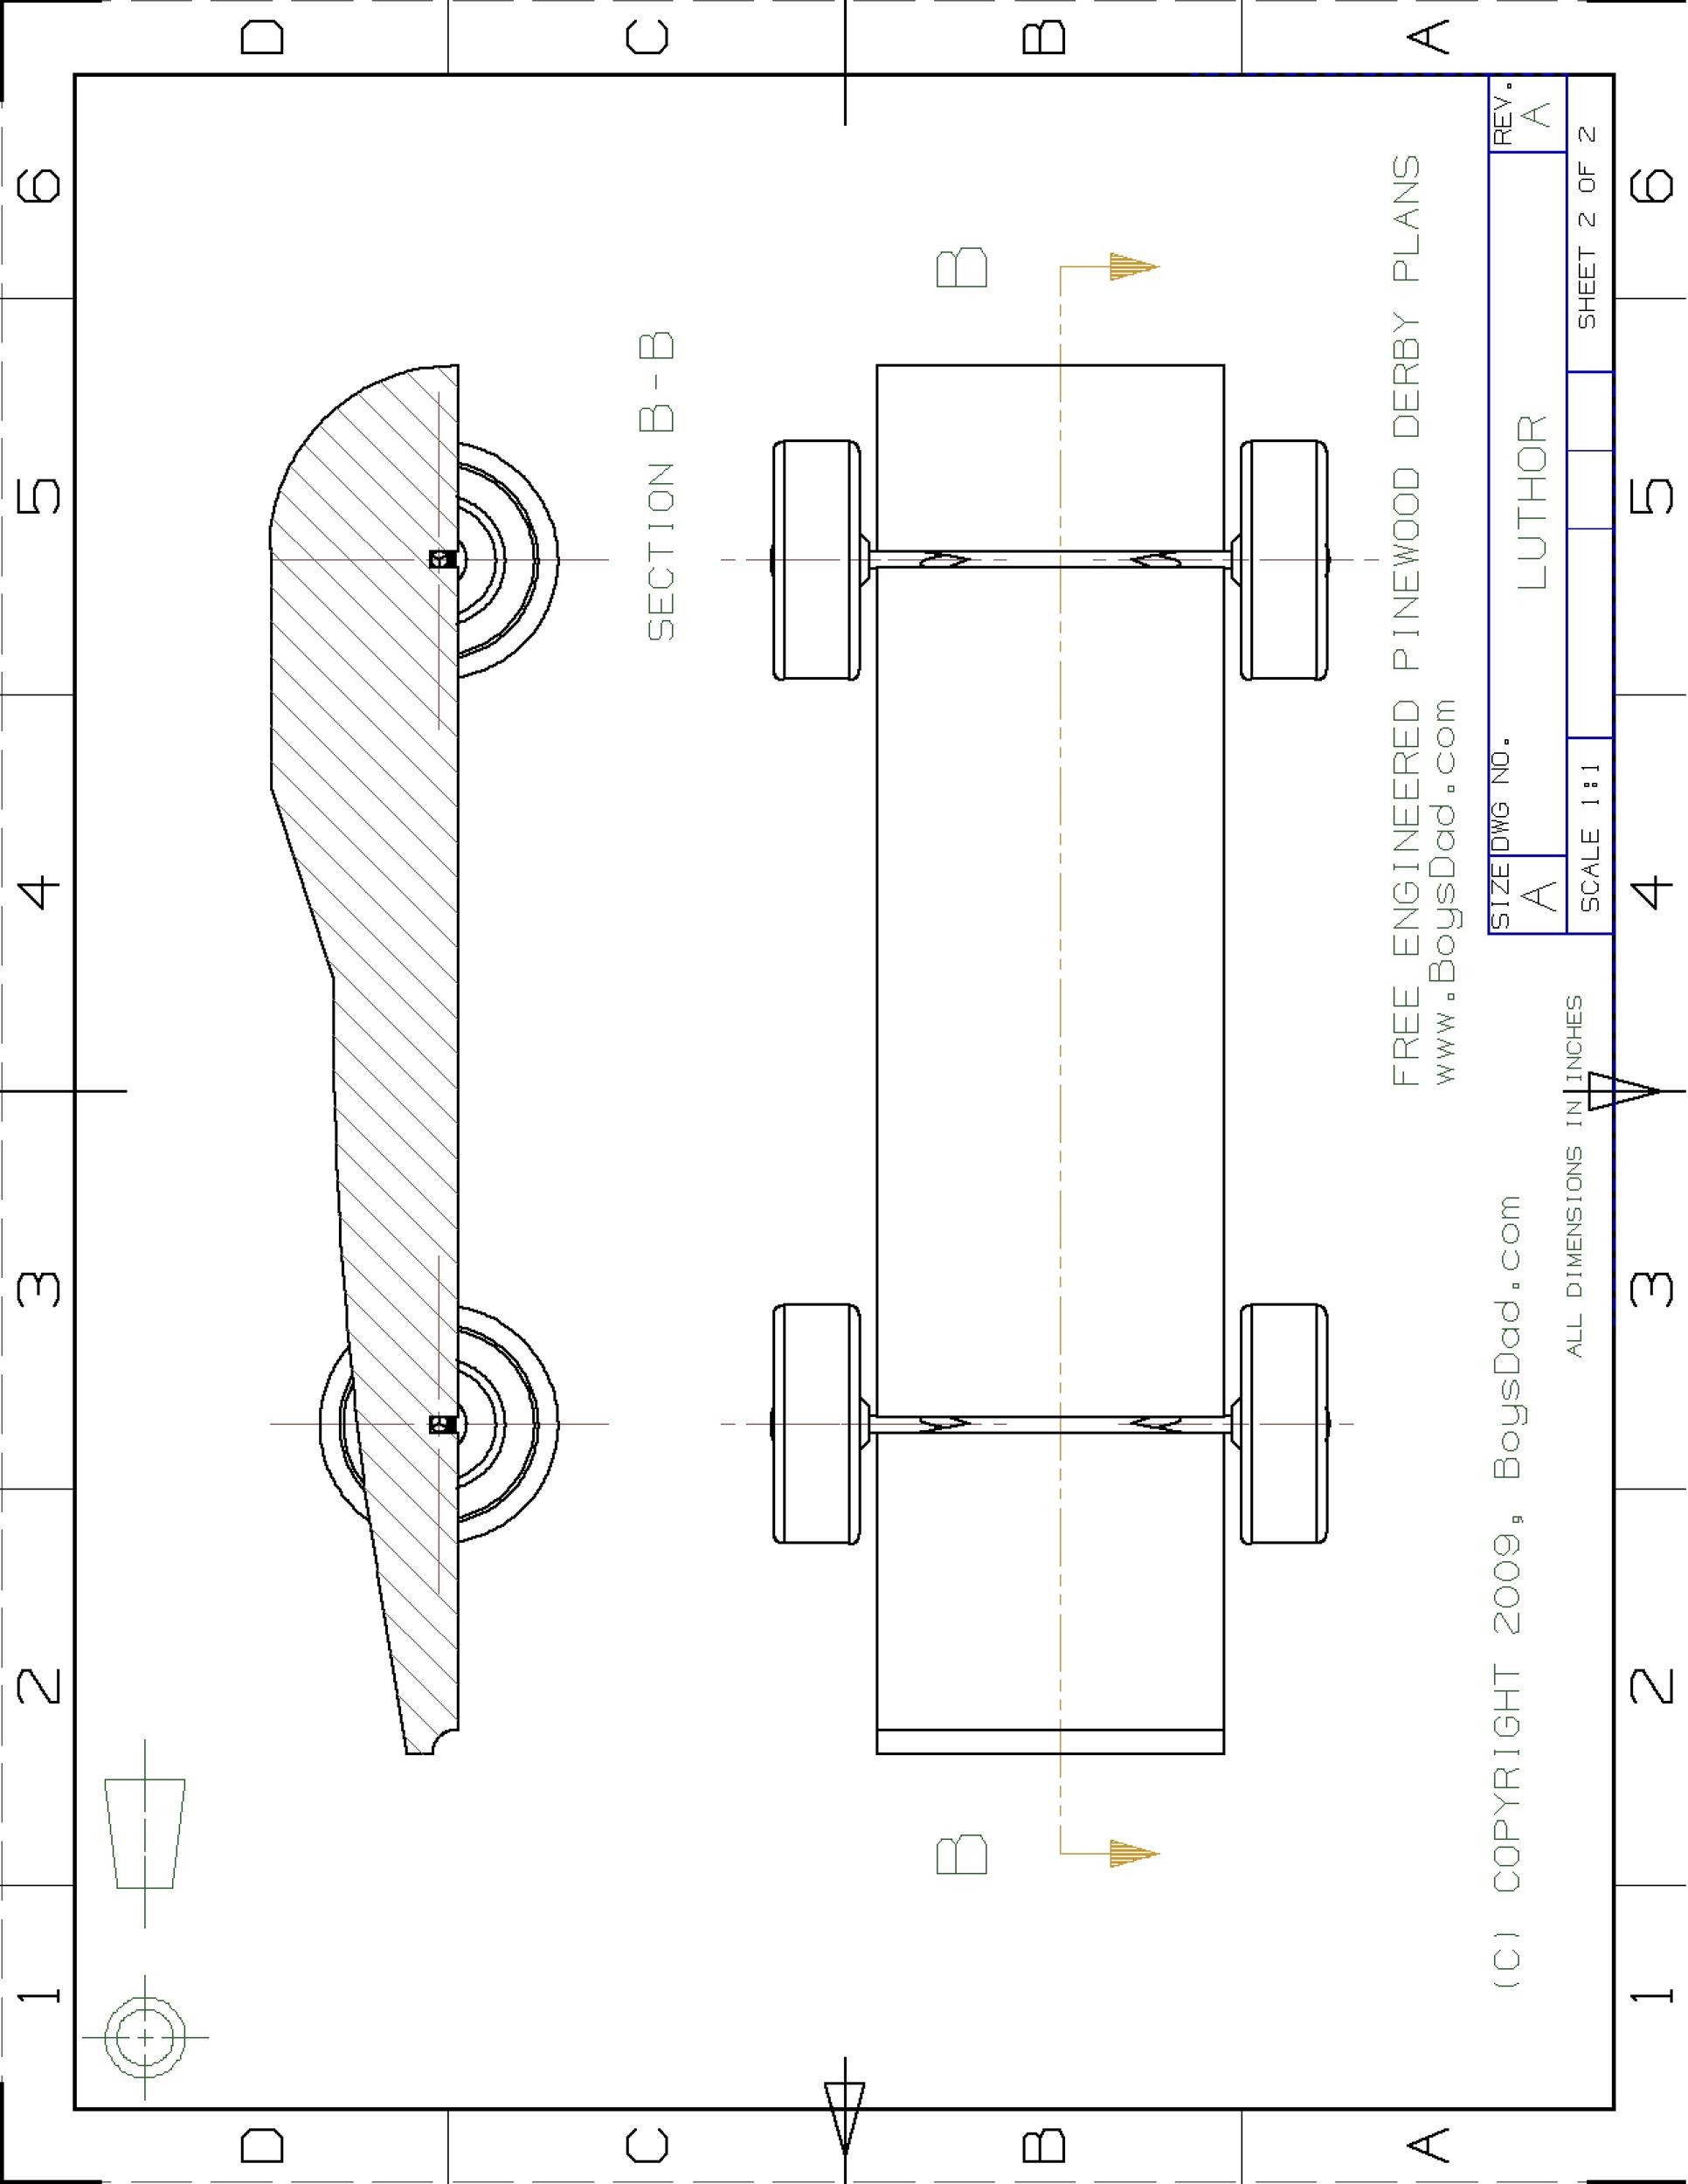 Printable Patterns For Pinewood Derby Cars